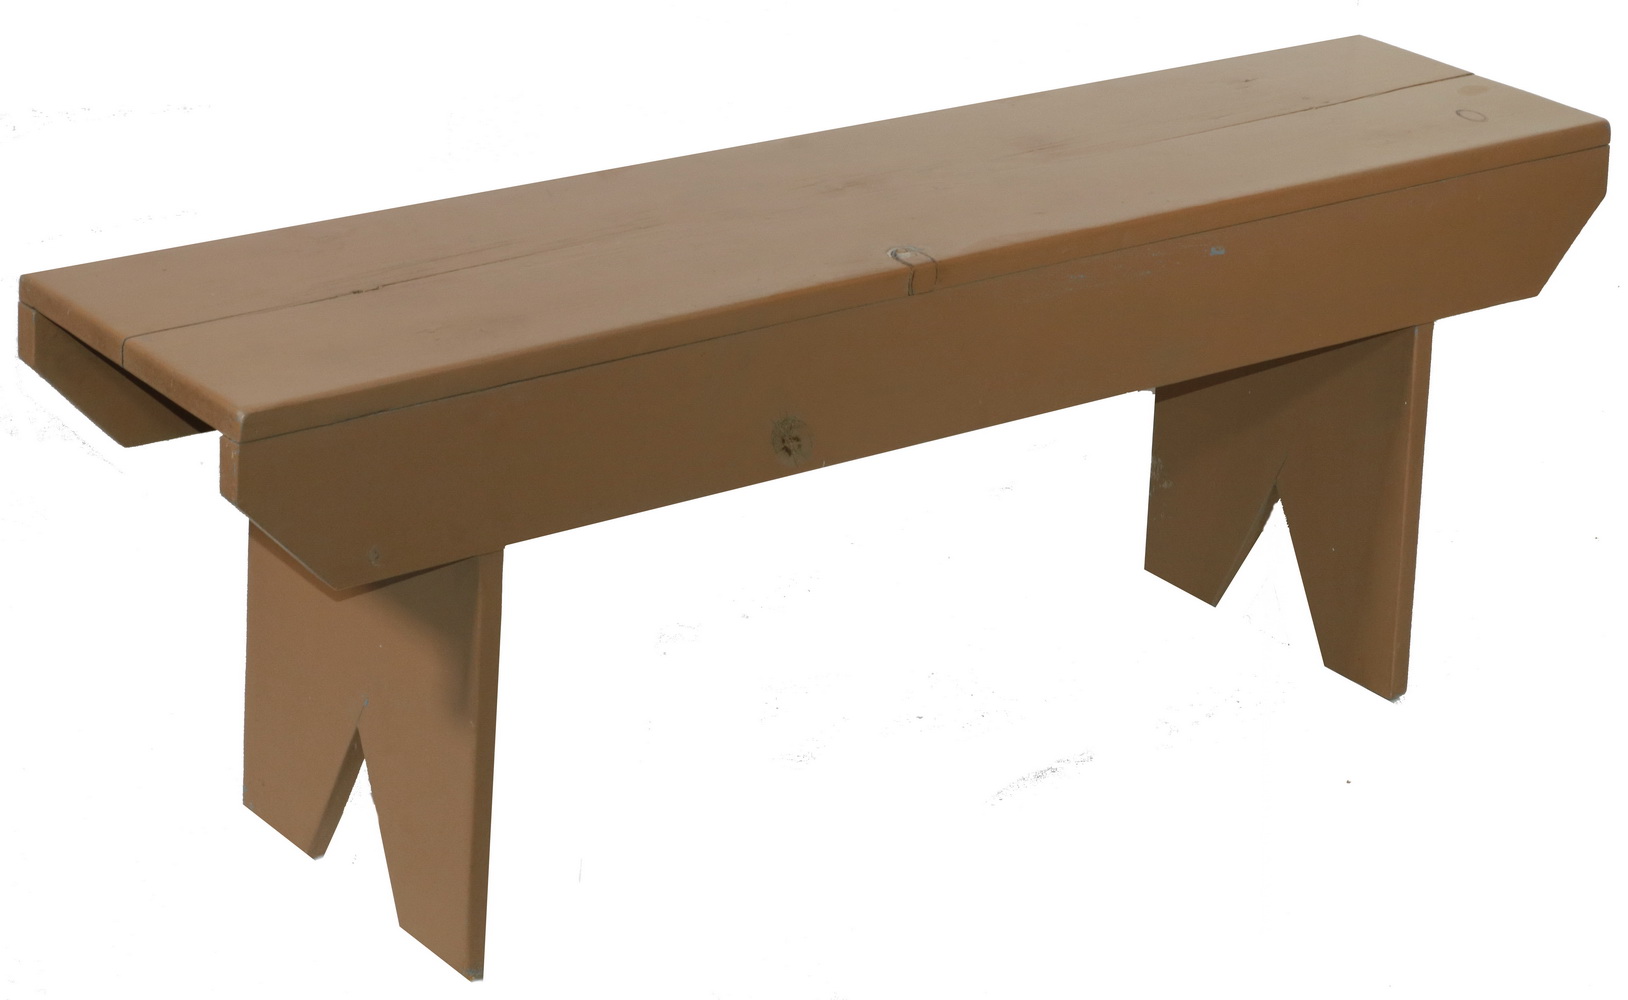 BROWN PAINTED PINE COUNTRY BENCH